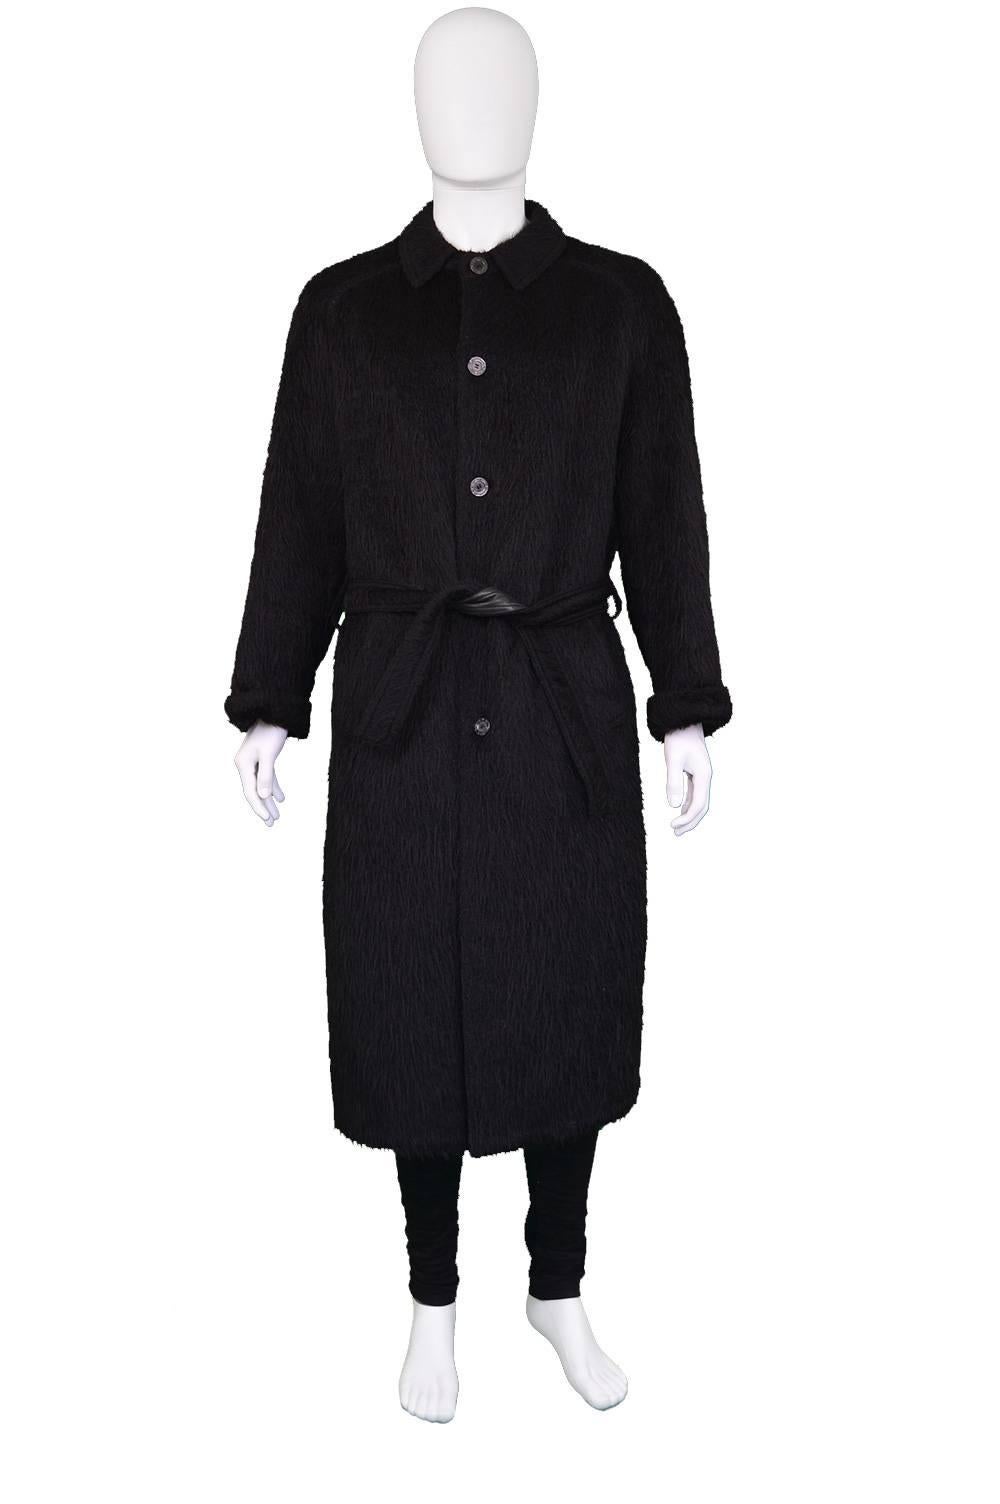 An absolutely breathtaking and incredibly rare vintage men's coat from the 1970s by luxury French fashion house, Hermés. In a luxurious black, fuzzy alpaca-wool blend with the softest lambskin leather on the back of the collar, on the inside seams